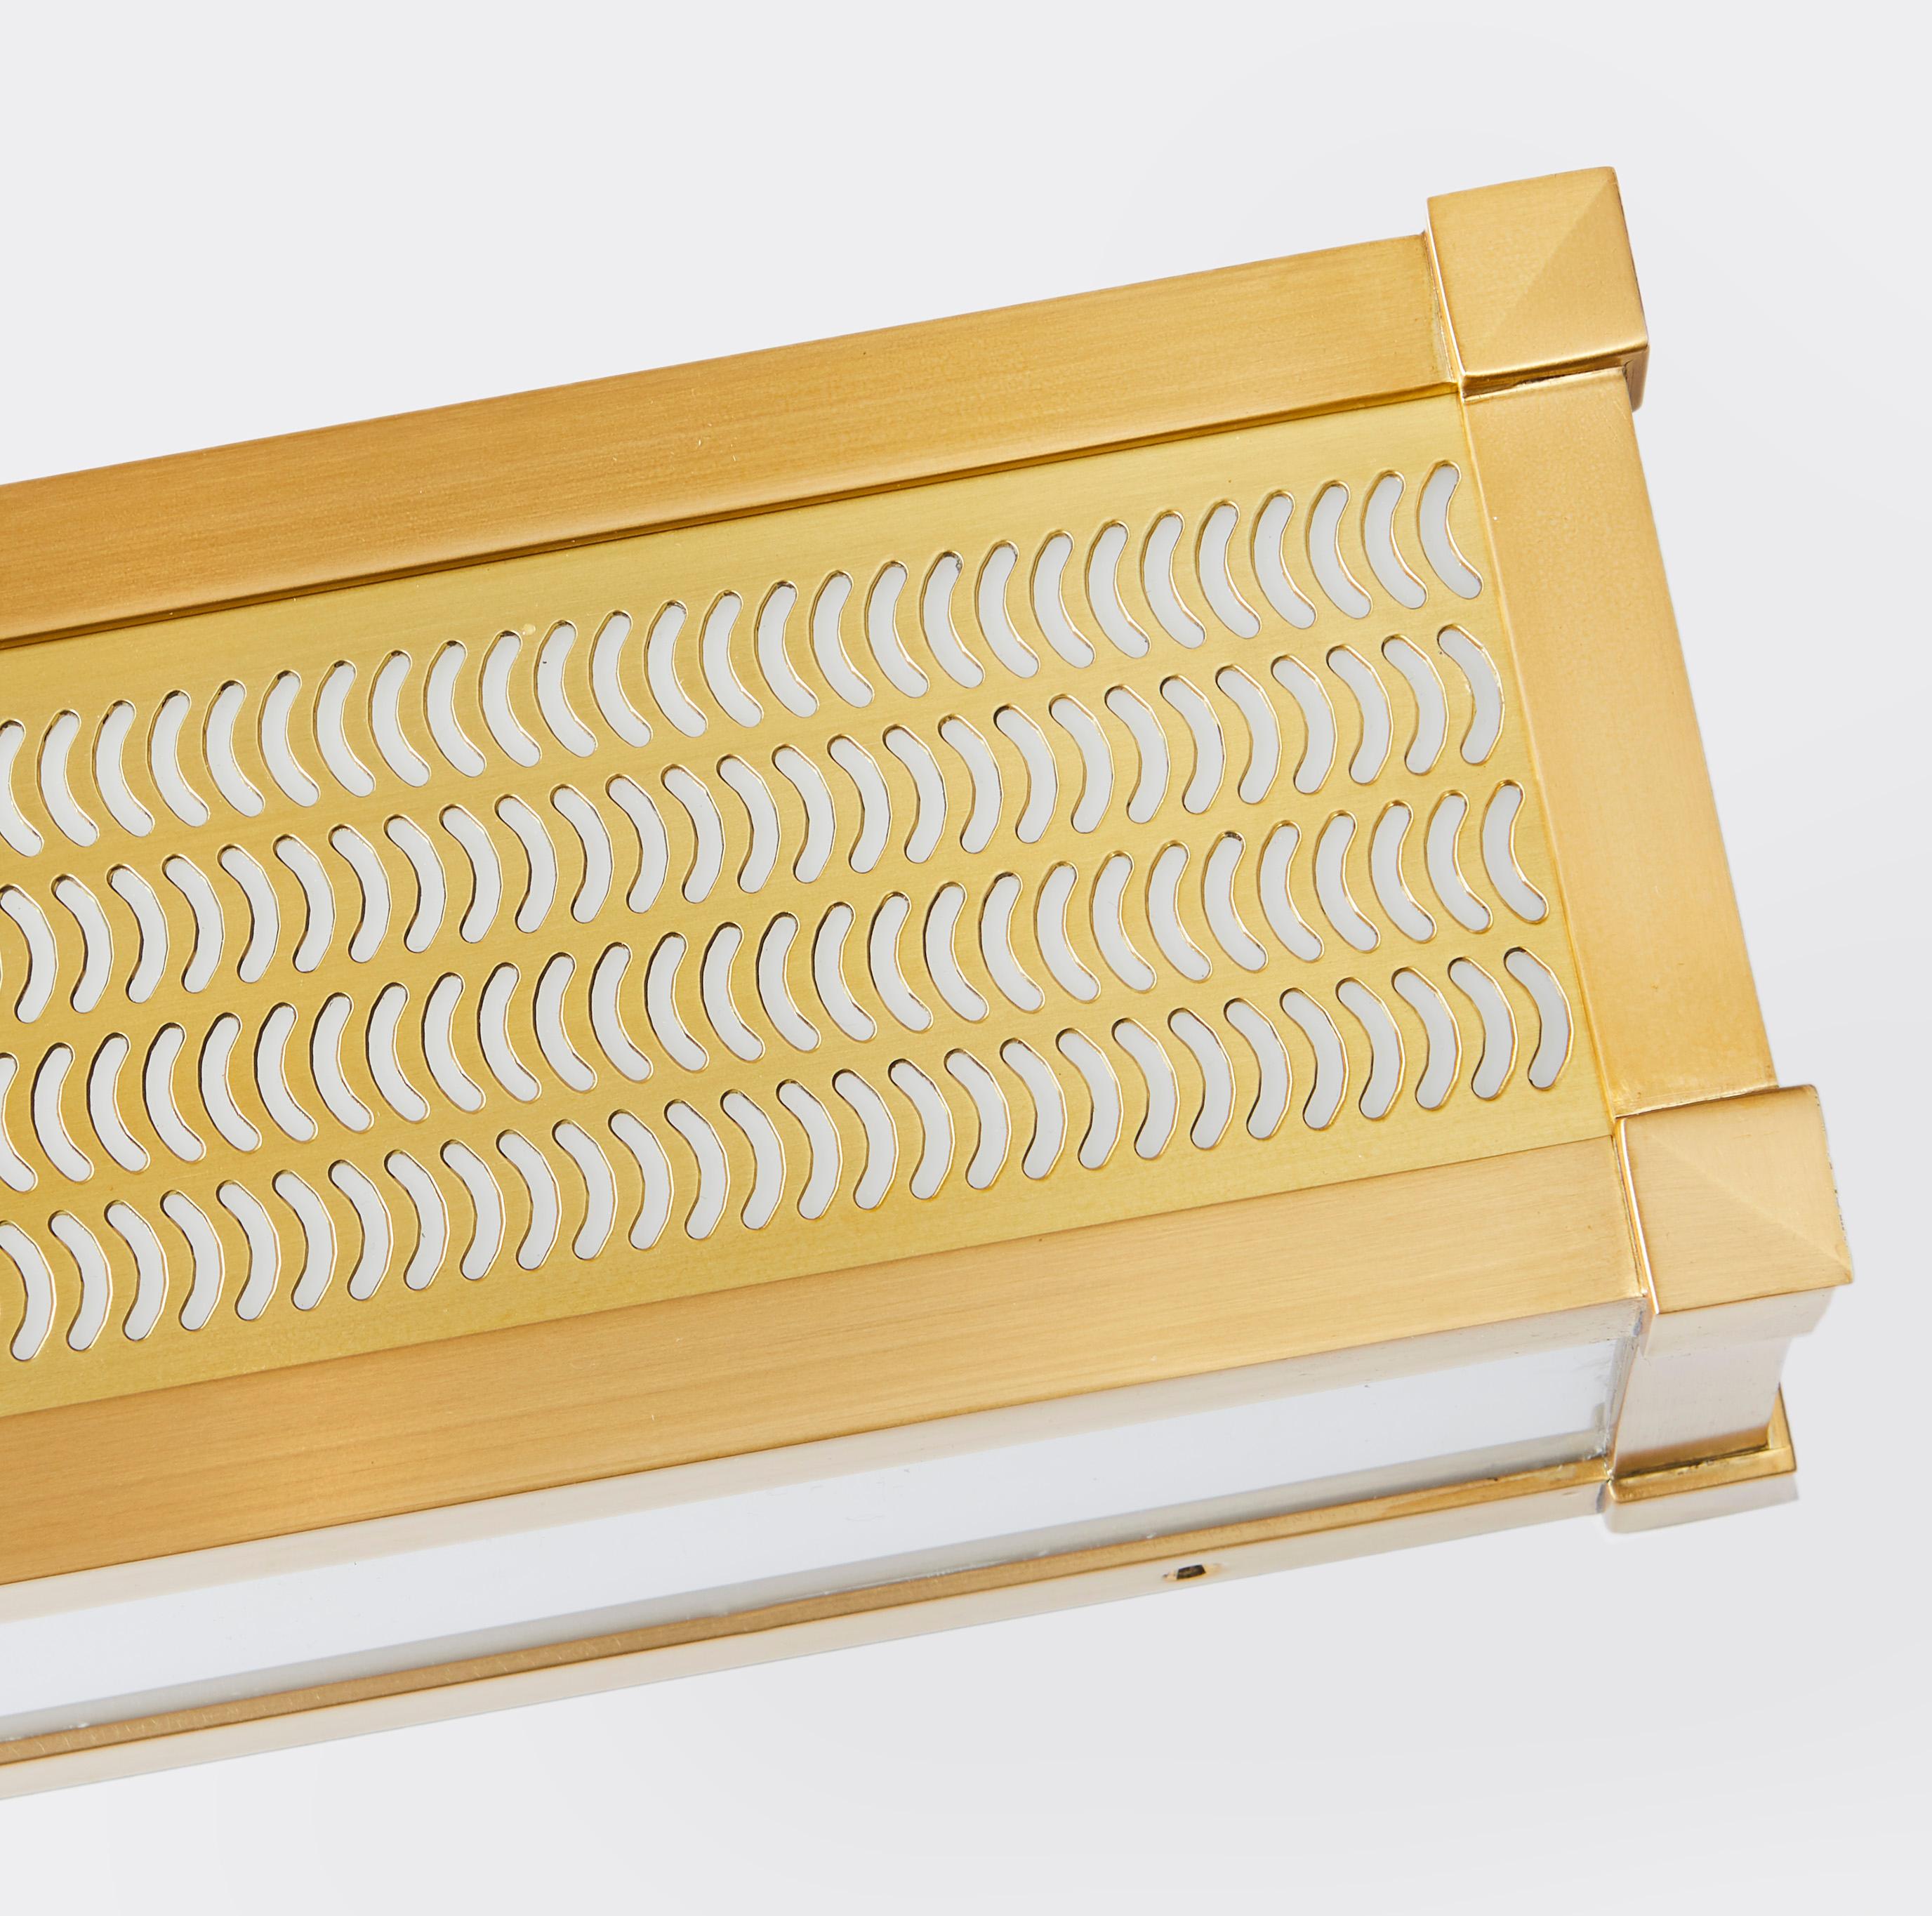 A rectangular, horizontal box-shaped light fixture. The brass frame engraved with comma shaped cut outs which emit light. Panels feature bevelled corner details, while the front sides and underside are fitted with opal plexi diffusers. 

As part